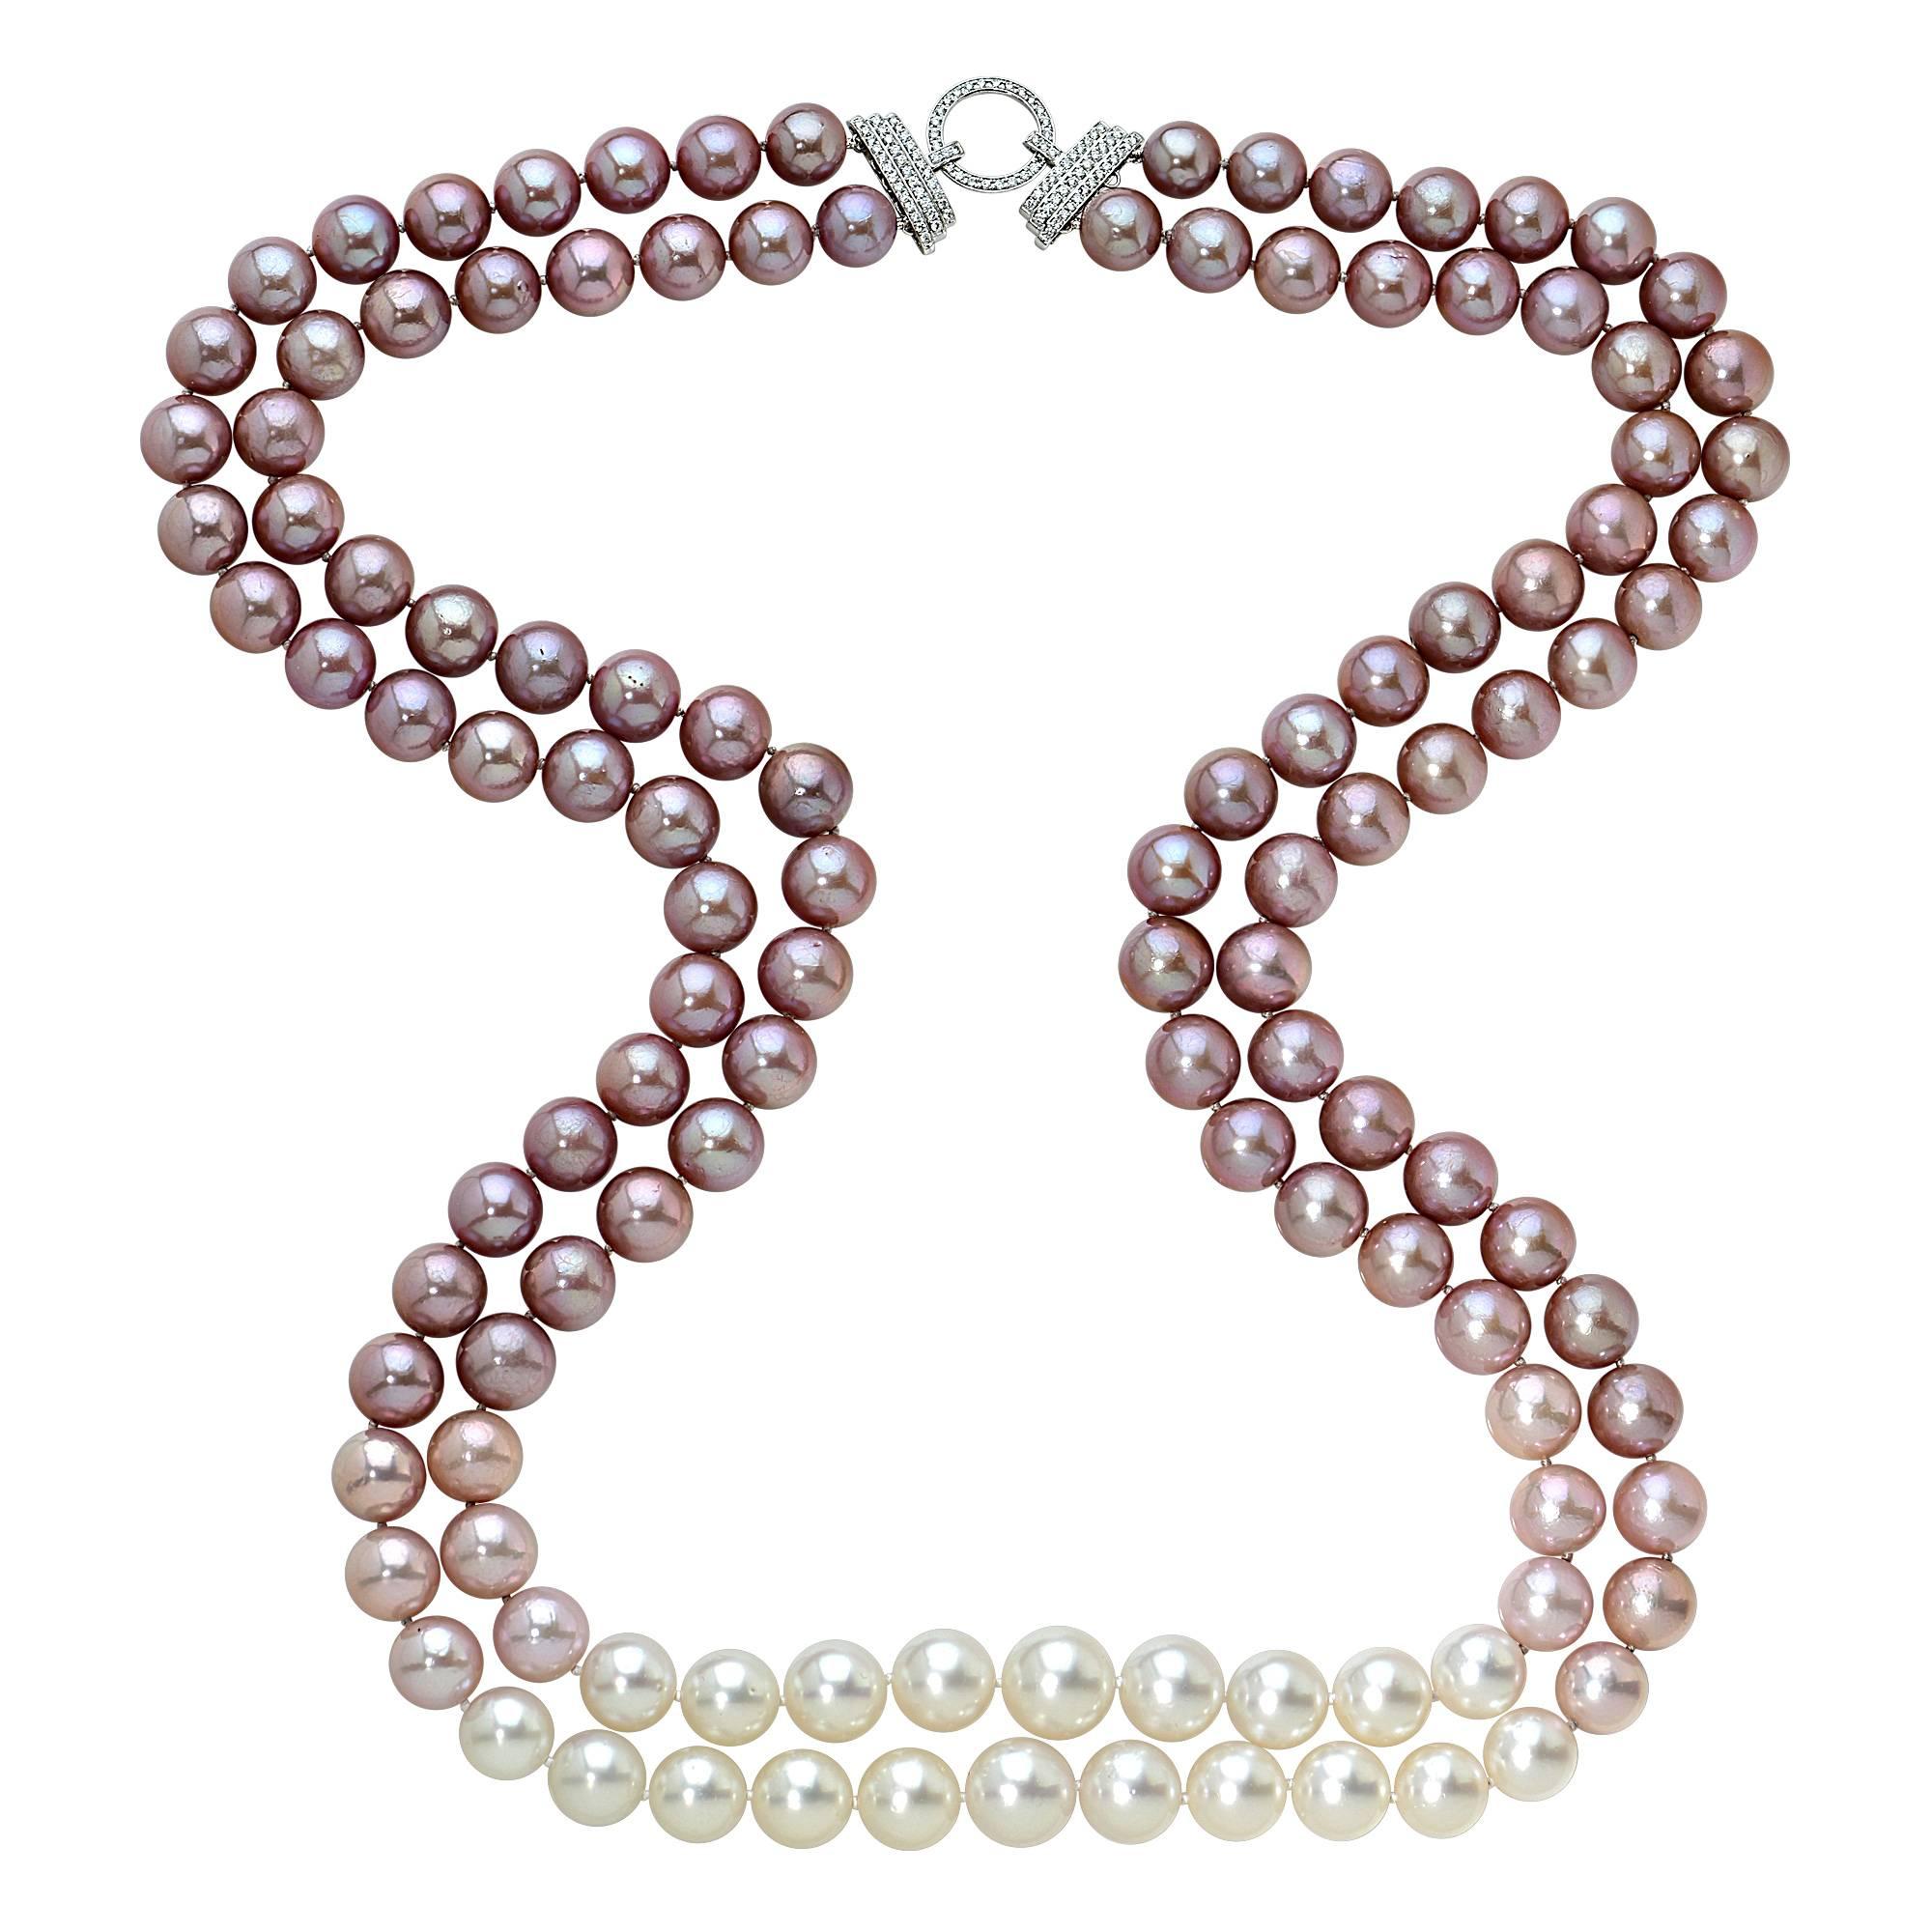 South sea and fresh water pearls accented by a diamond clasp.

This diamond necklace is accompanied by a retail appraisal performed by a Graduate Gemologist.